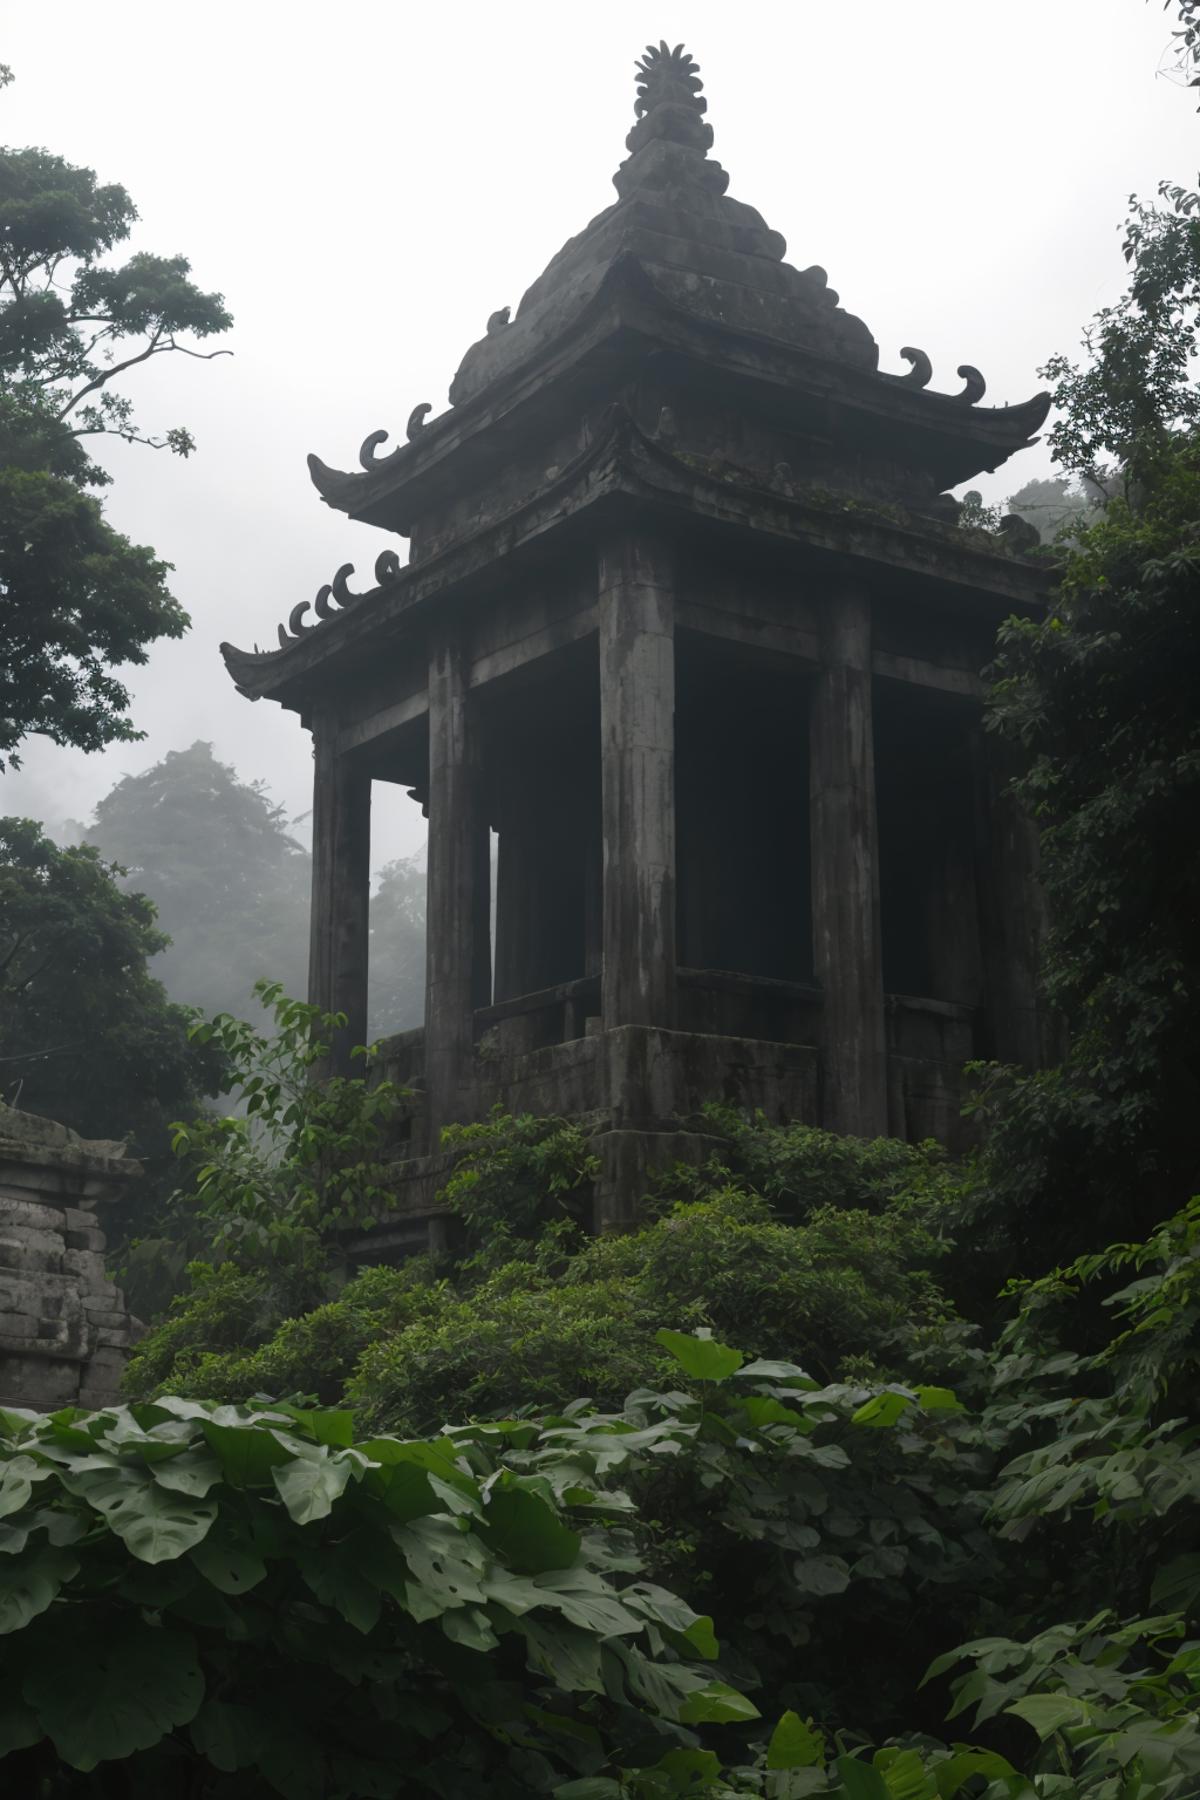 Ancient Stone Tower with Asian Decoration and Green Moss, Foggy Forest, Misty Mountains in the Background